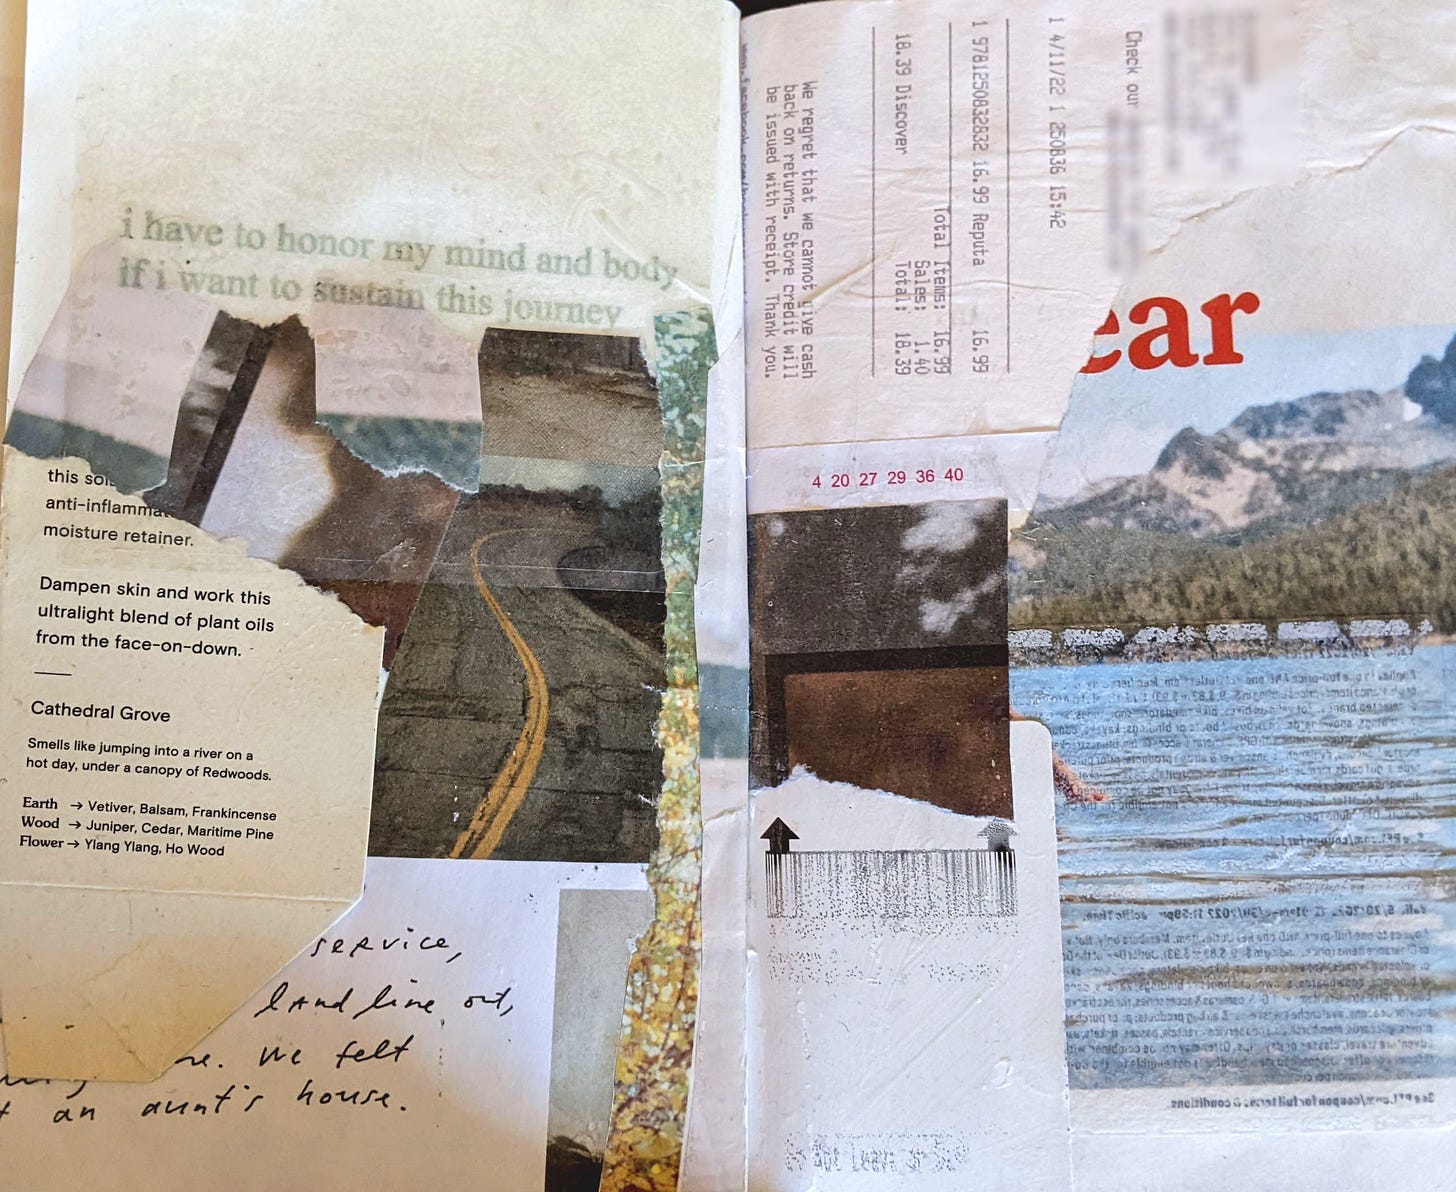 collage featuring rupi kaur poem, receipts, image of a lake and mountain, a gray road, and blurry images of trees